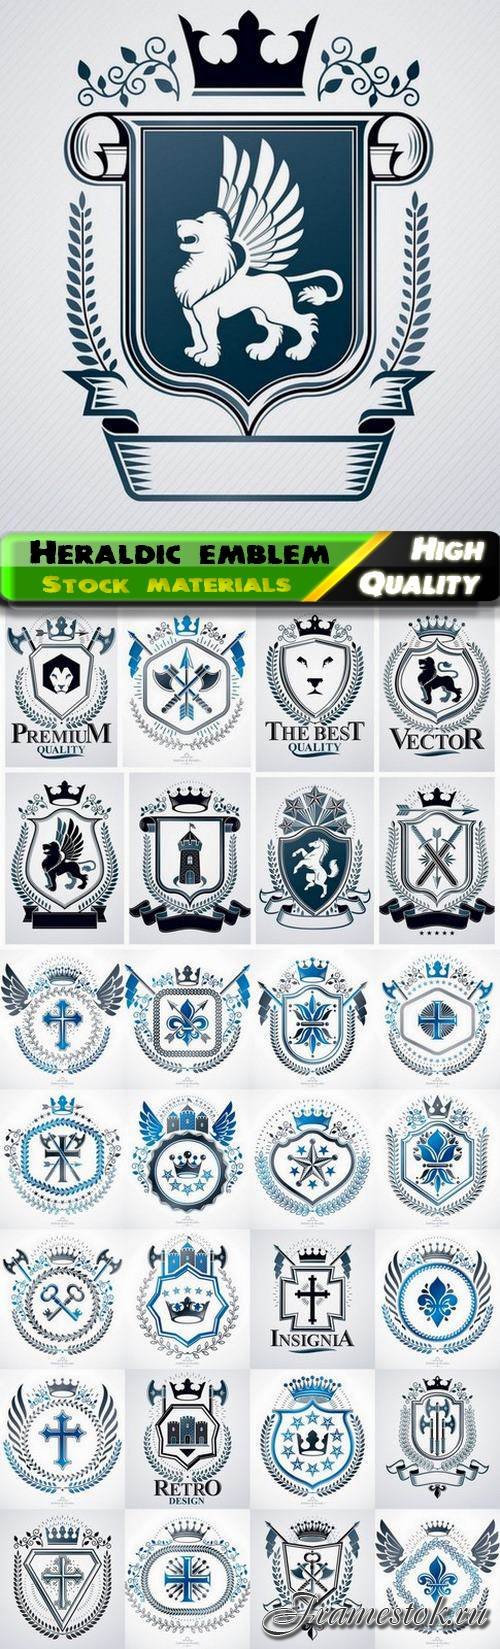 Heraldic emblem and stamp with coat of arms 2 - 30 Eps